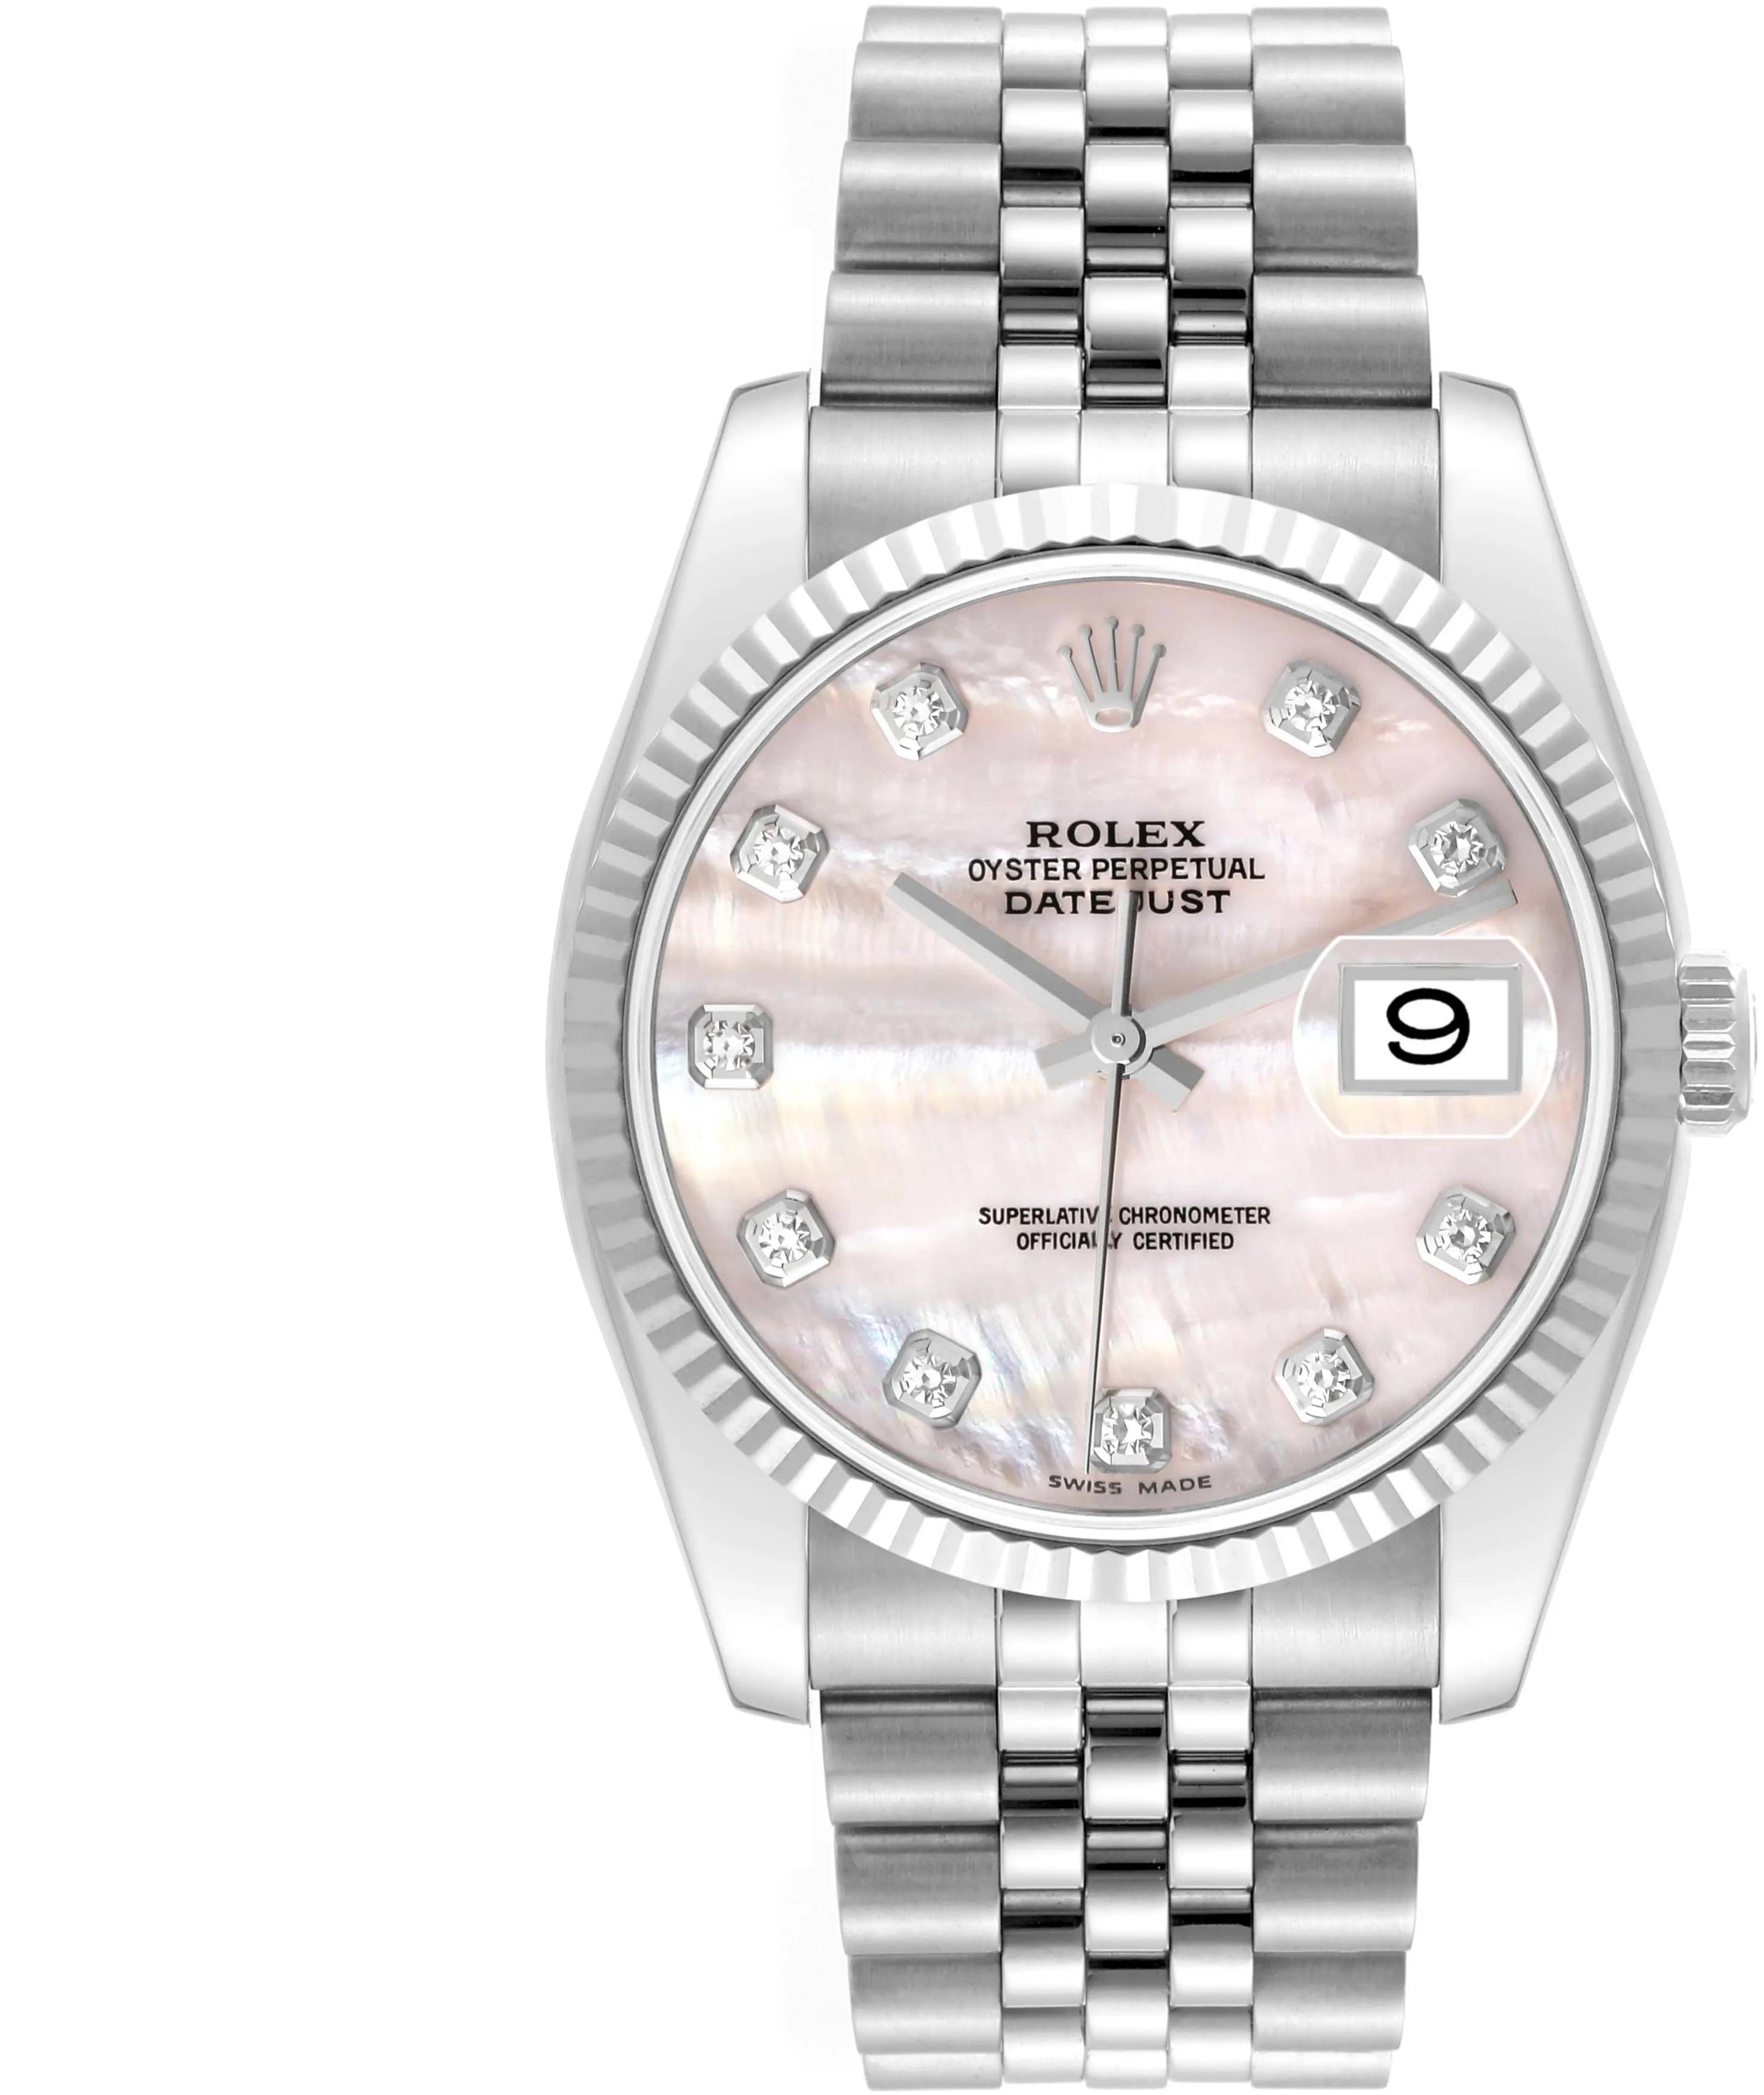 Rolex Datejust 36 116234 36mm Stainless steel Mother-of-pearl